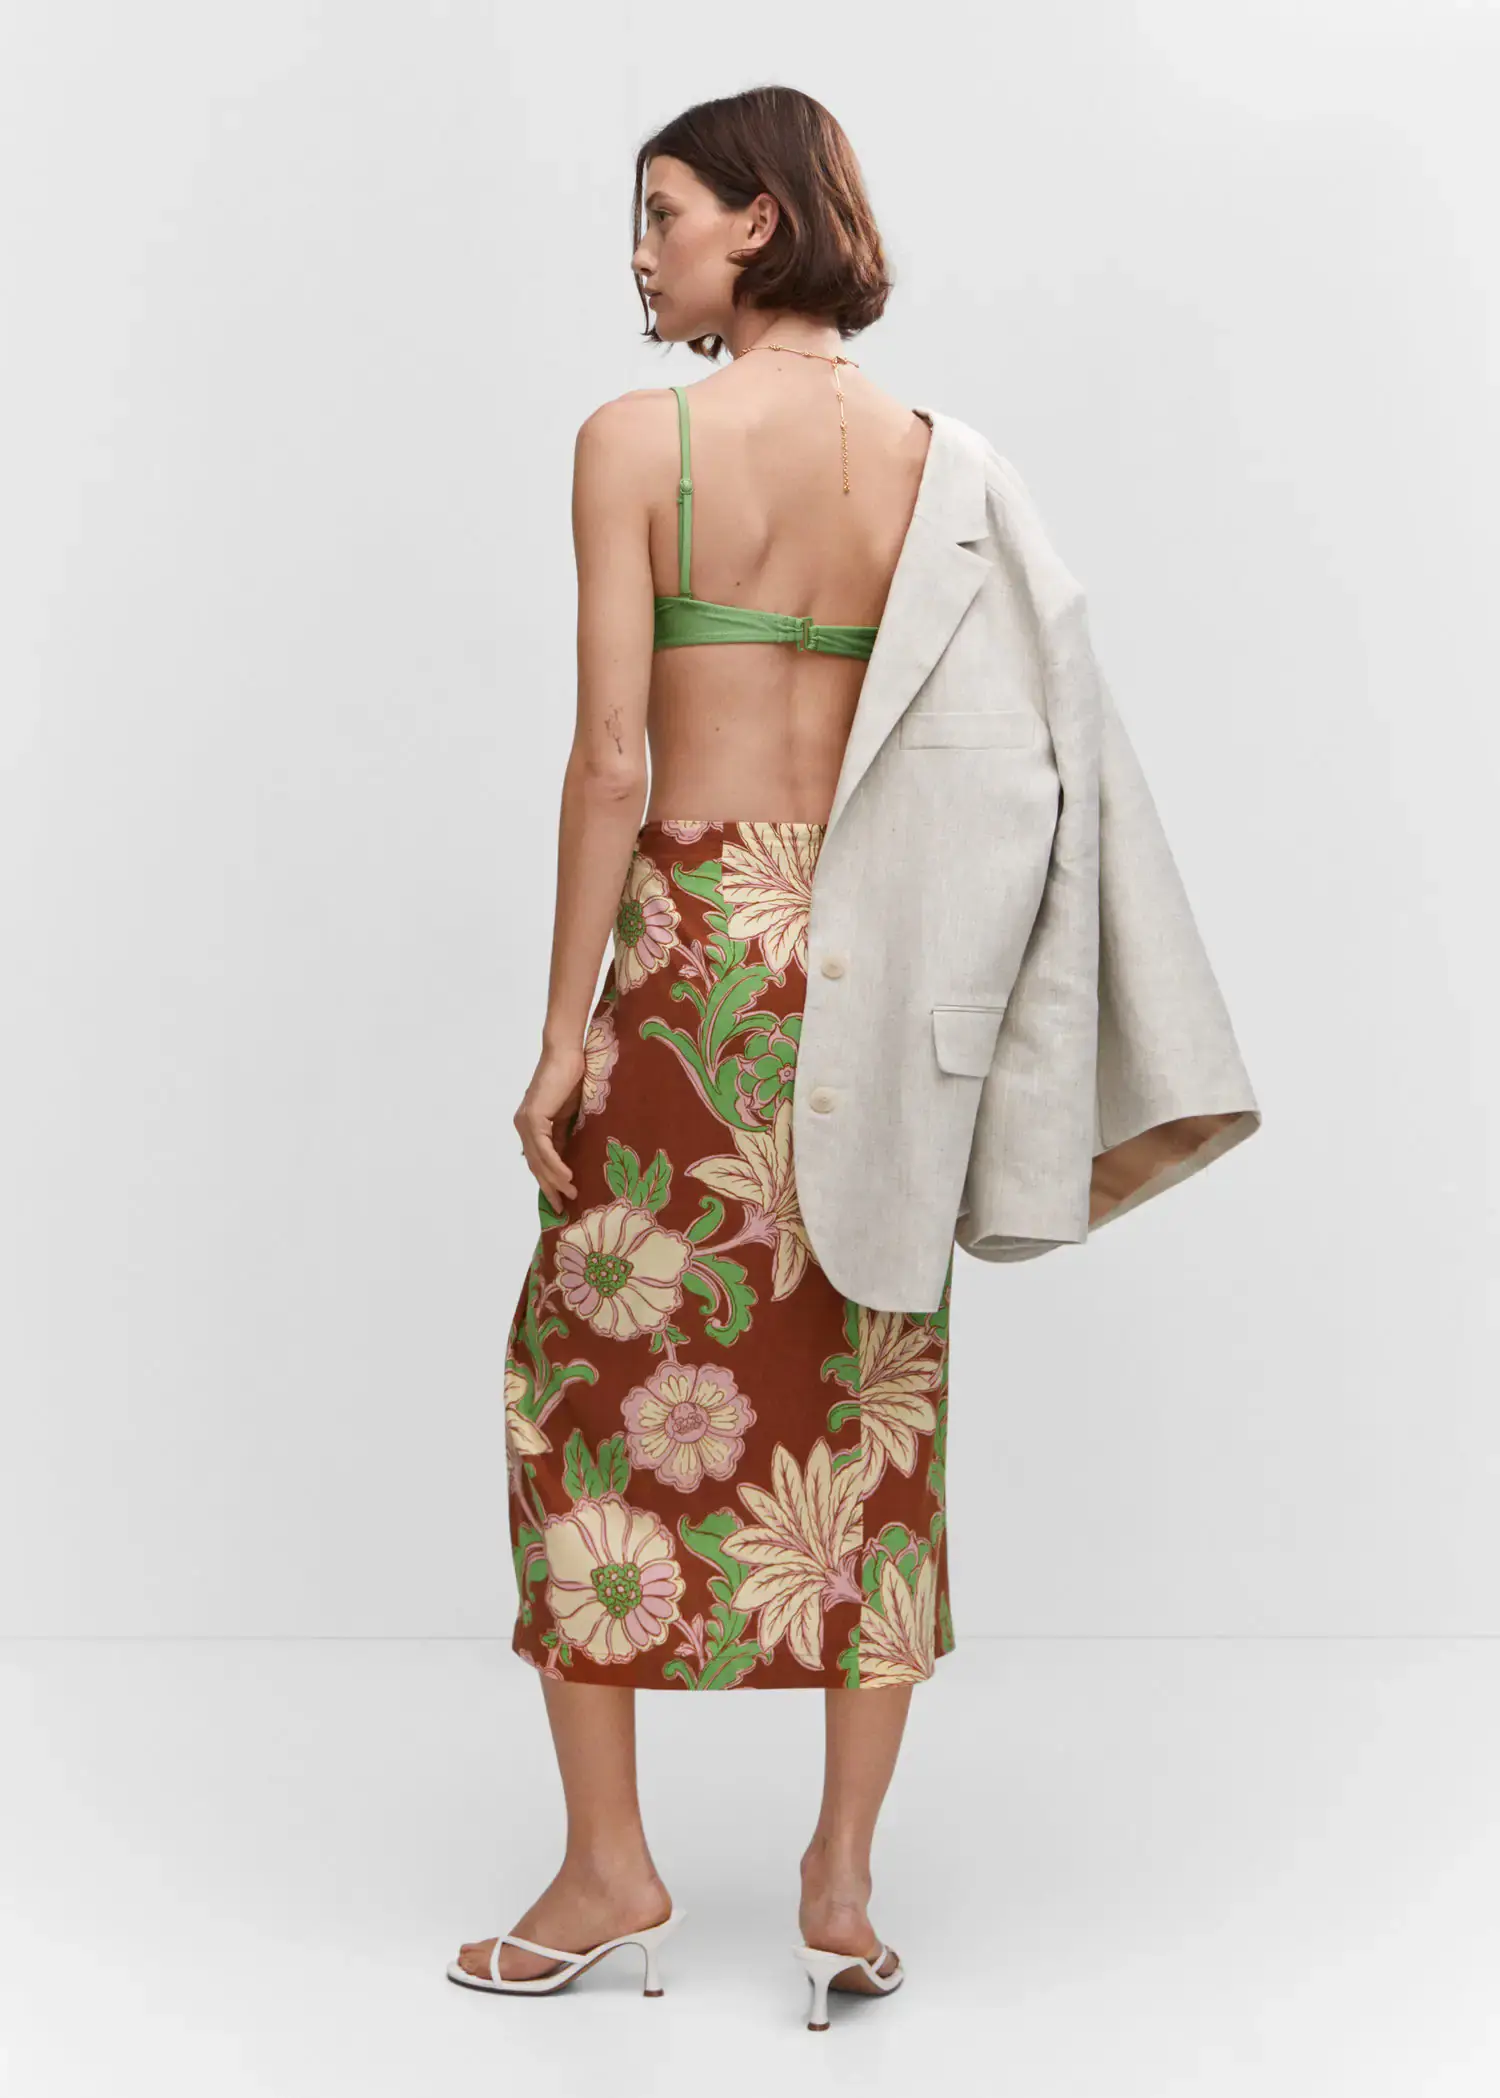 Mango Knot printed skirt. a woman wearing a floral skirt and a jacket. 